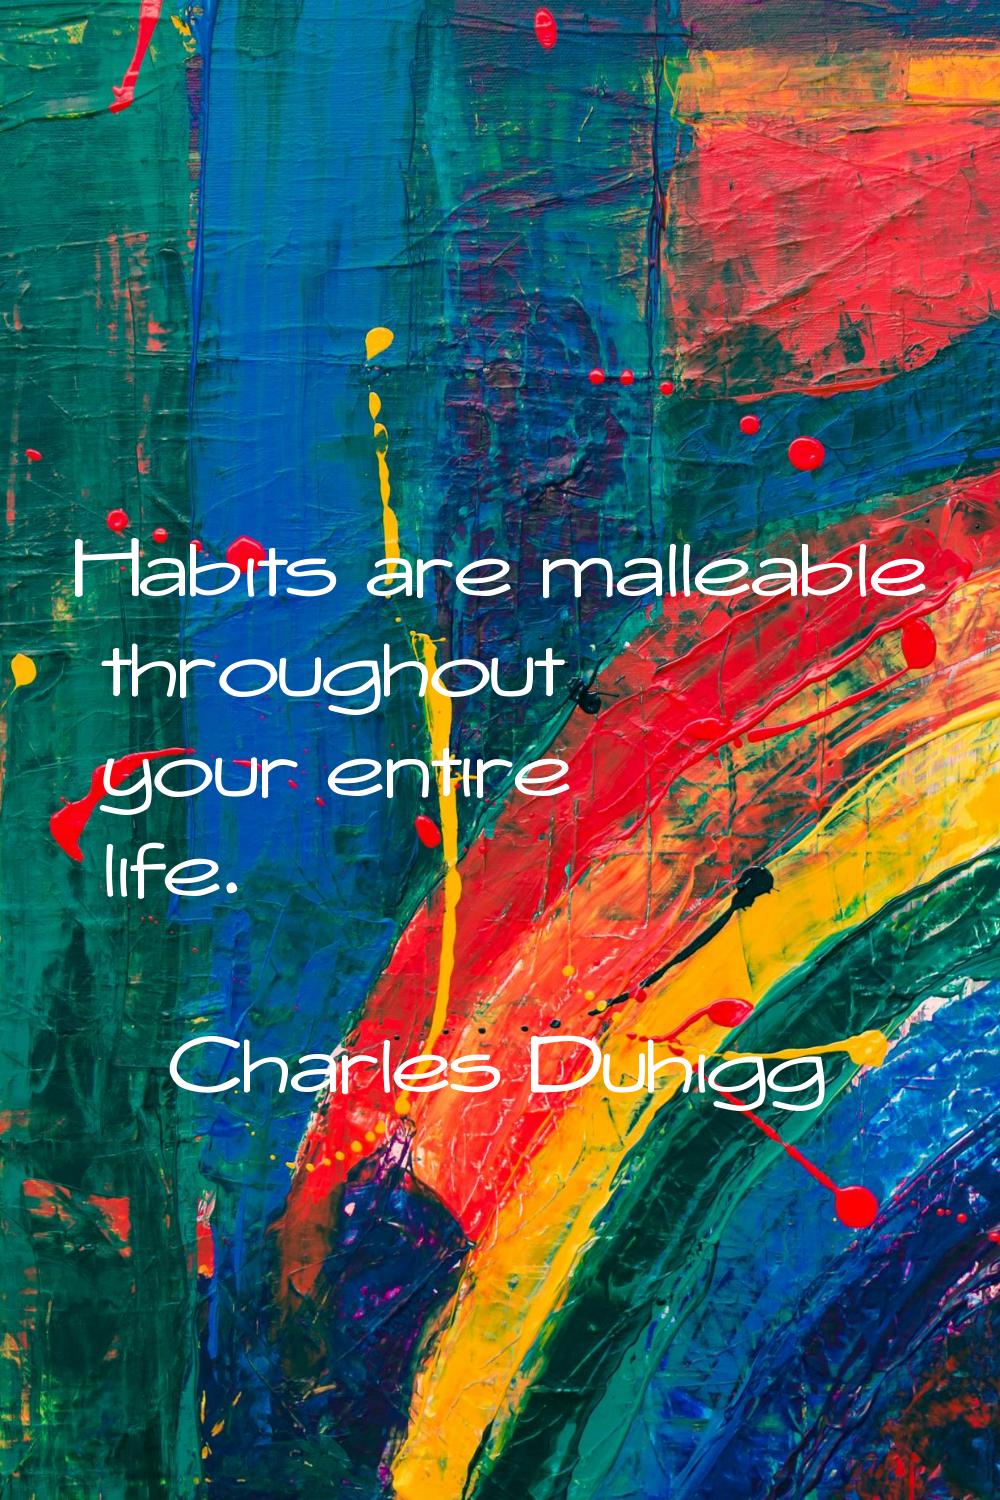 Habits are malleable throughout your entire life.